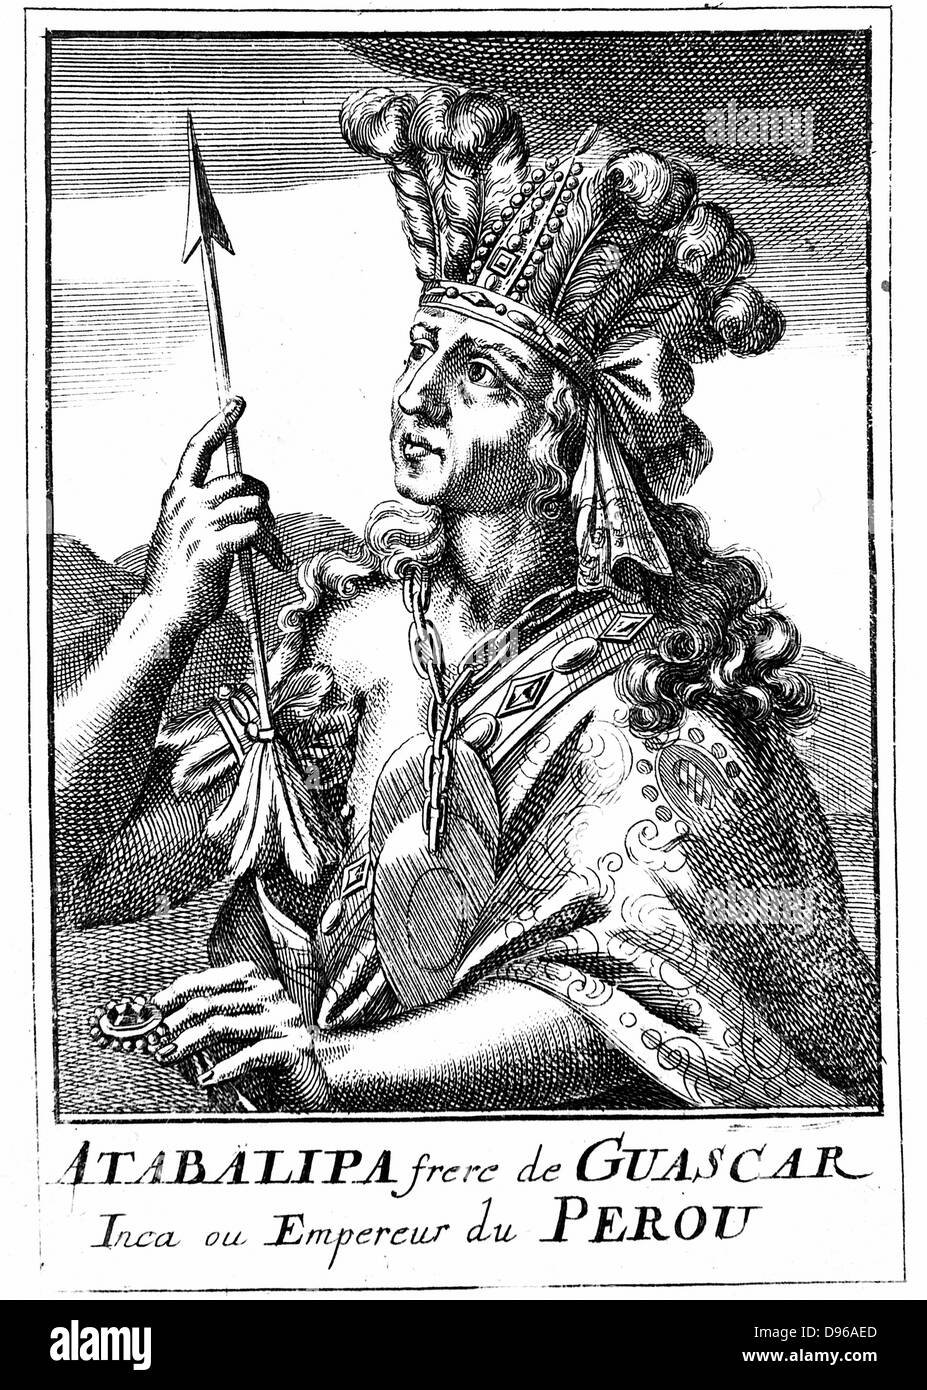 Atahualpa (d1553) last Inca emperor of Peru. Captured by Pizarro who, after extorting a huge ransom, put him to death for heresy (against Christianity). Copperplate engraving, 1686. Stock Photo